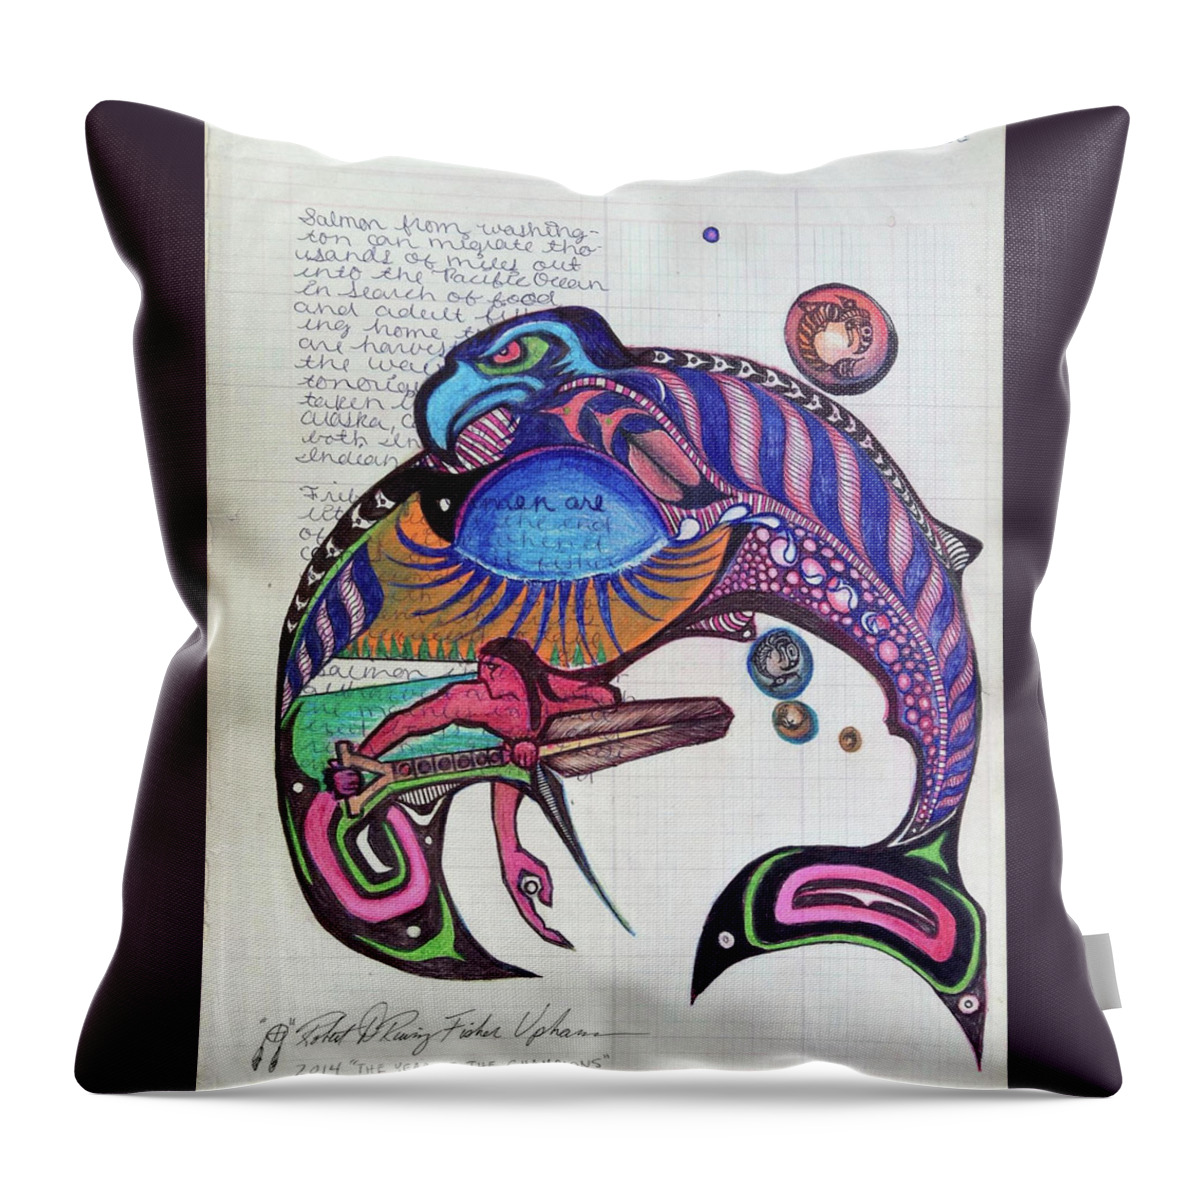 Quinault Nation Throw Pillow featuring the drawing Blueback Salmon by Robert Running Fisher Upham